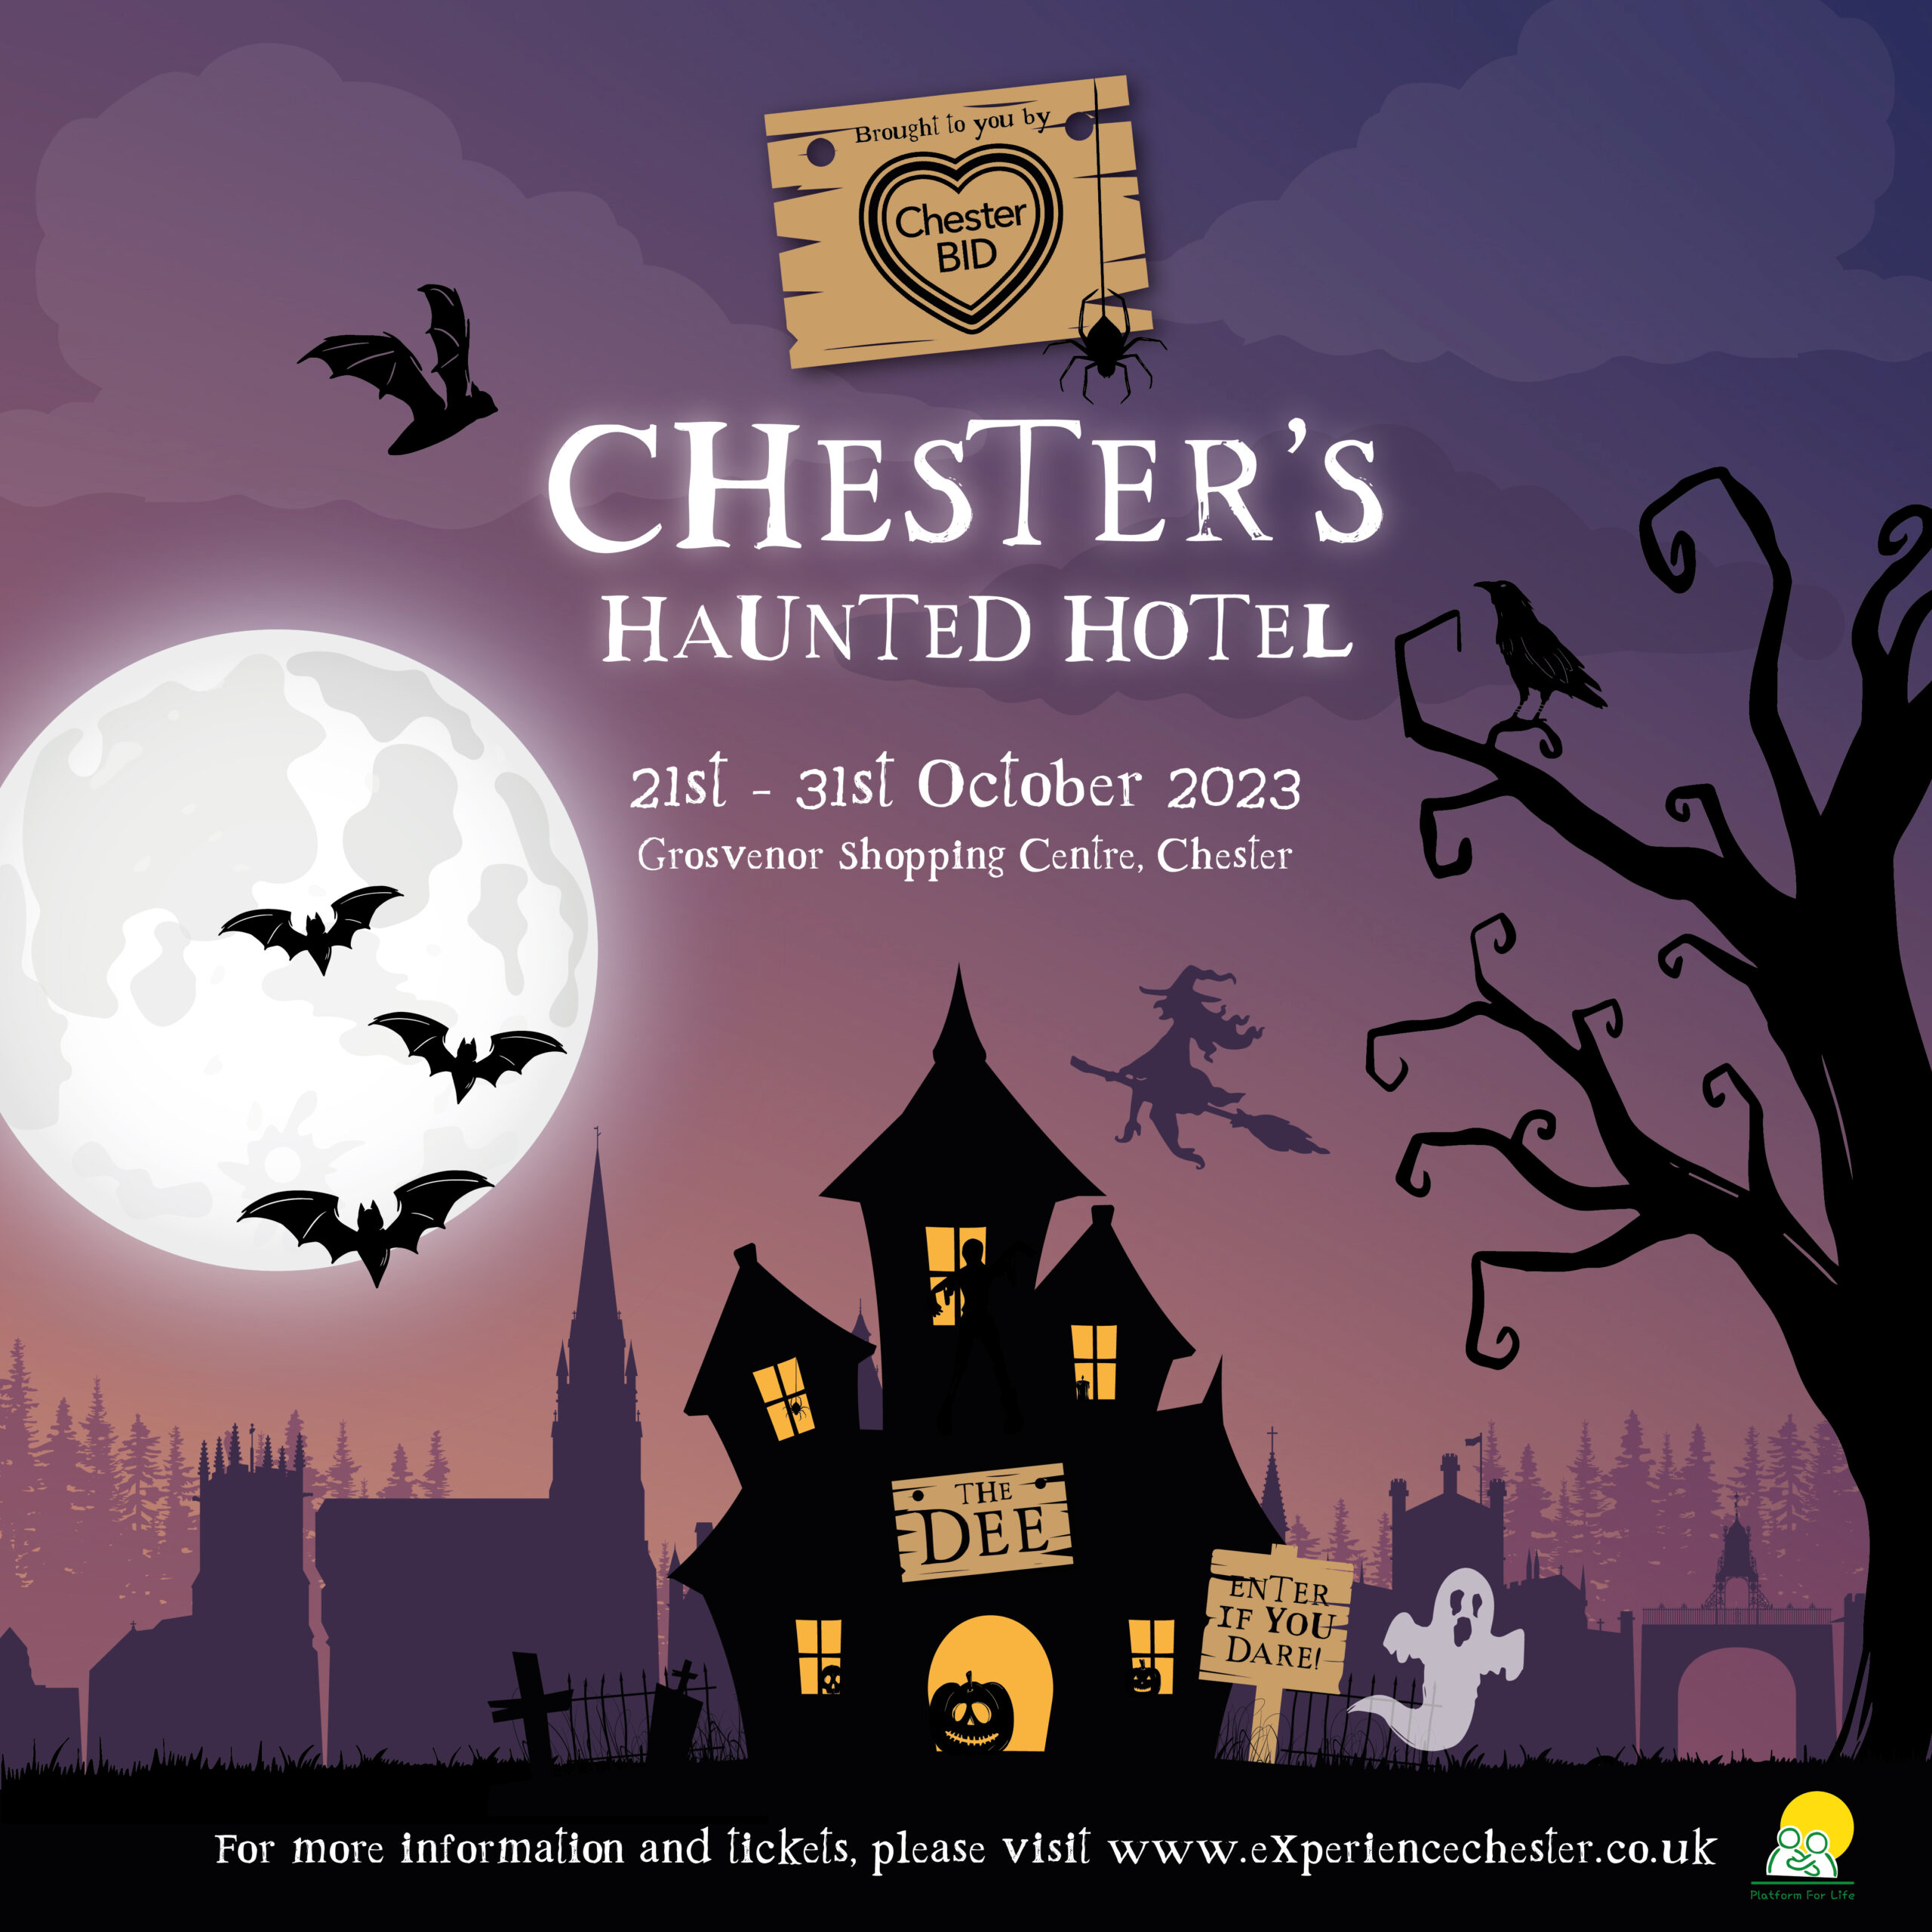 Chester's Haunted Hotel "The DEE"